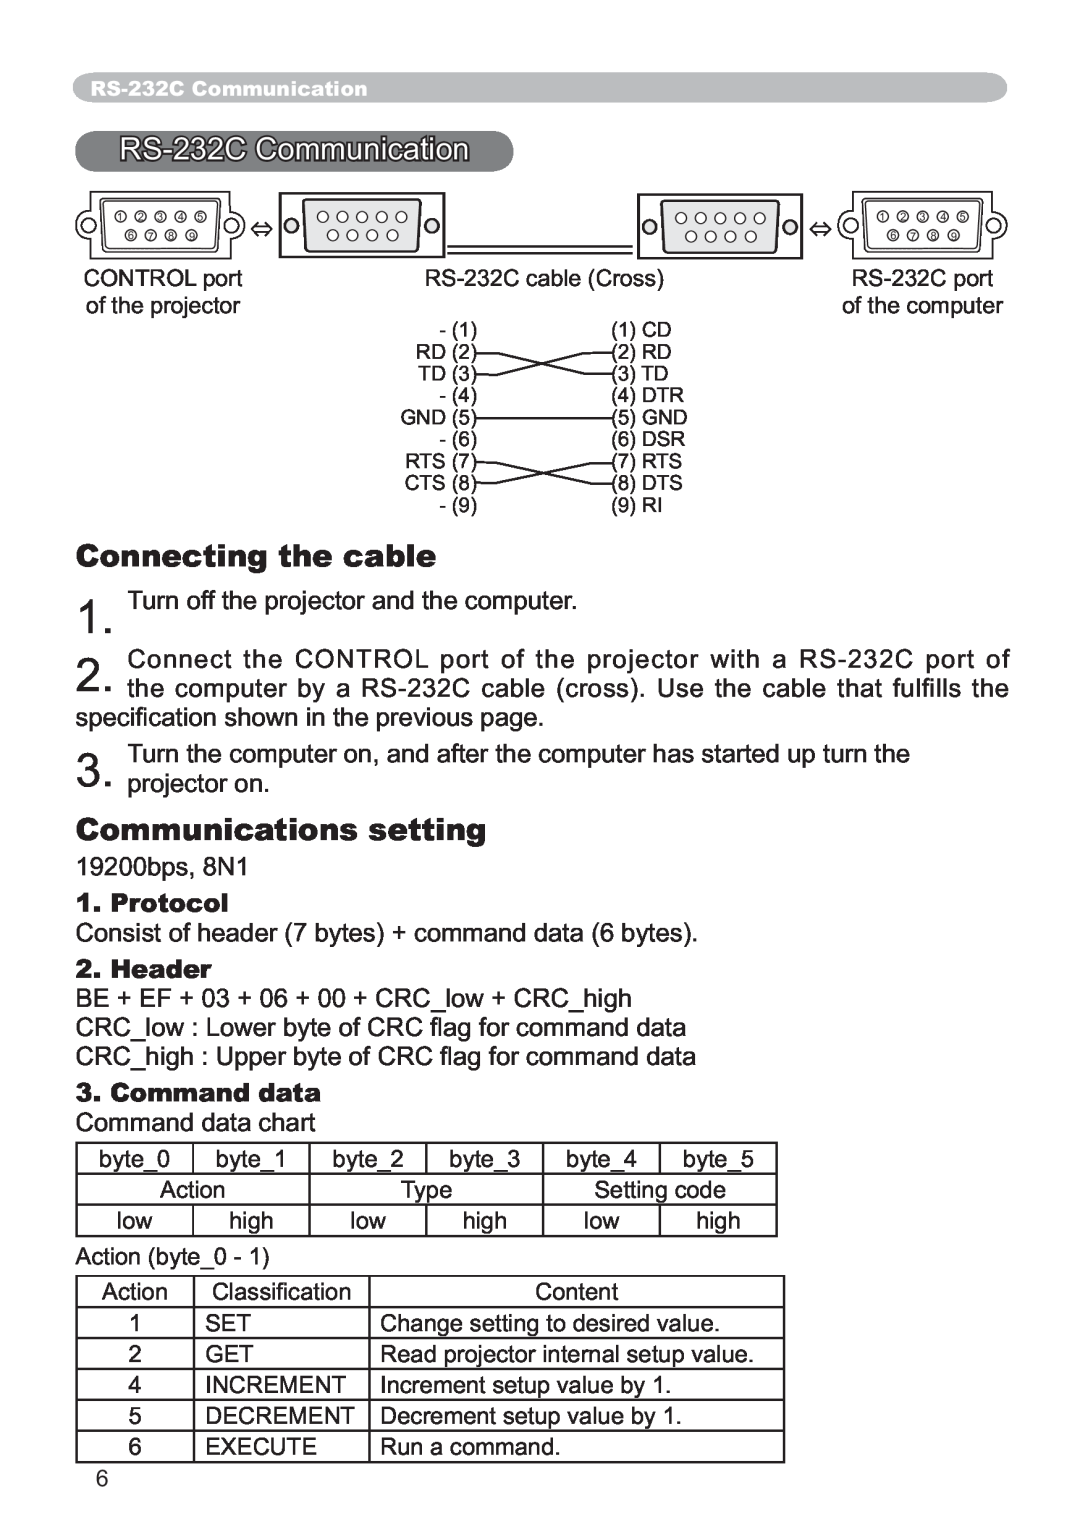 Hitachi ED-X12 RS-232CCommunication, Connecting the cable, Communications setting, Protocol, Header, Command data 